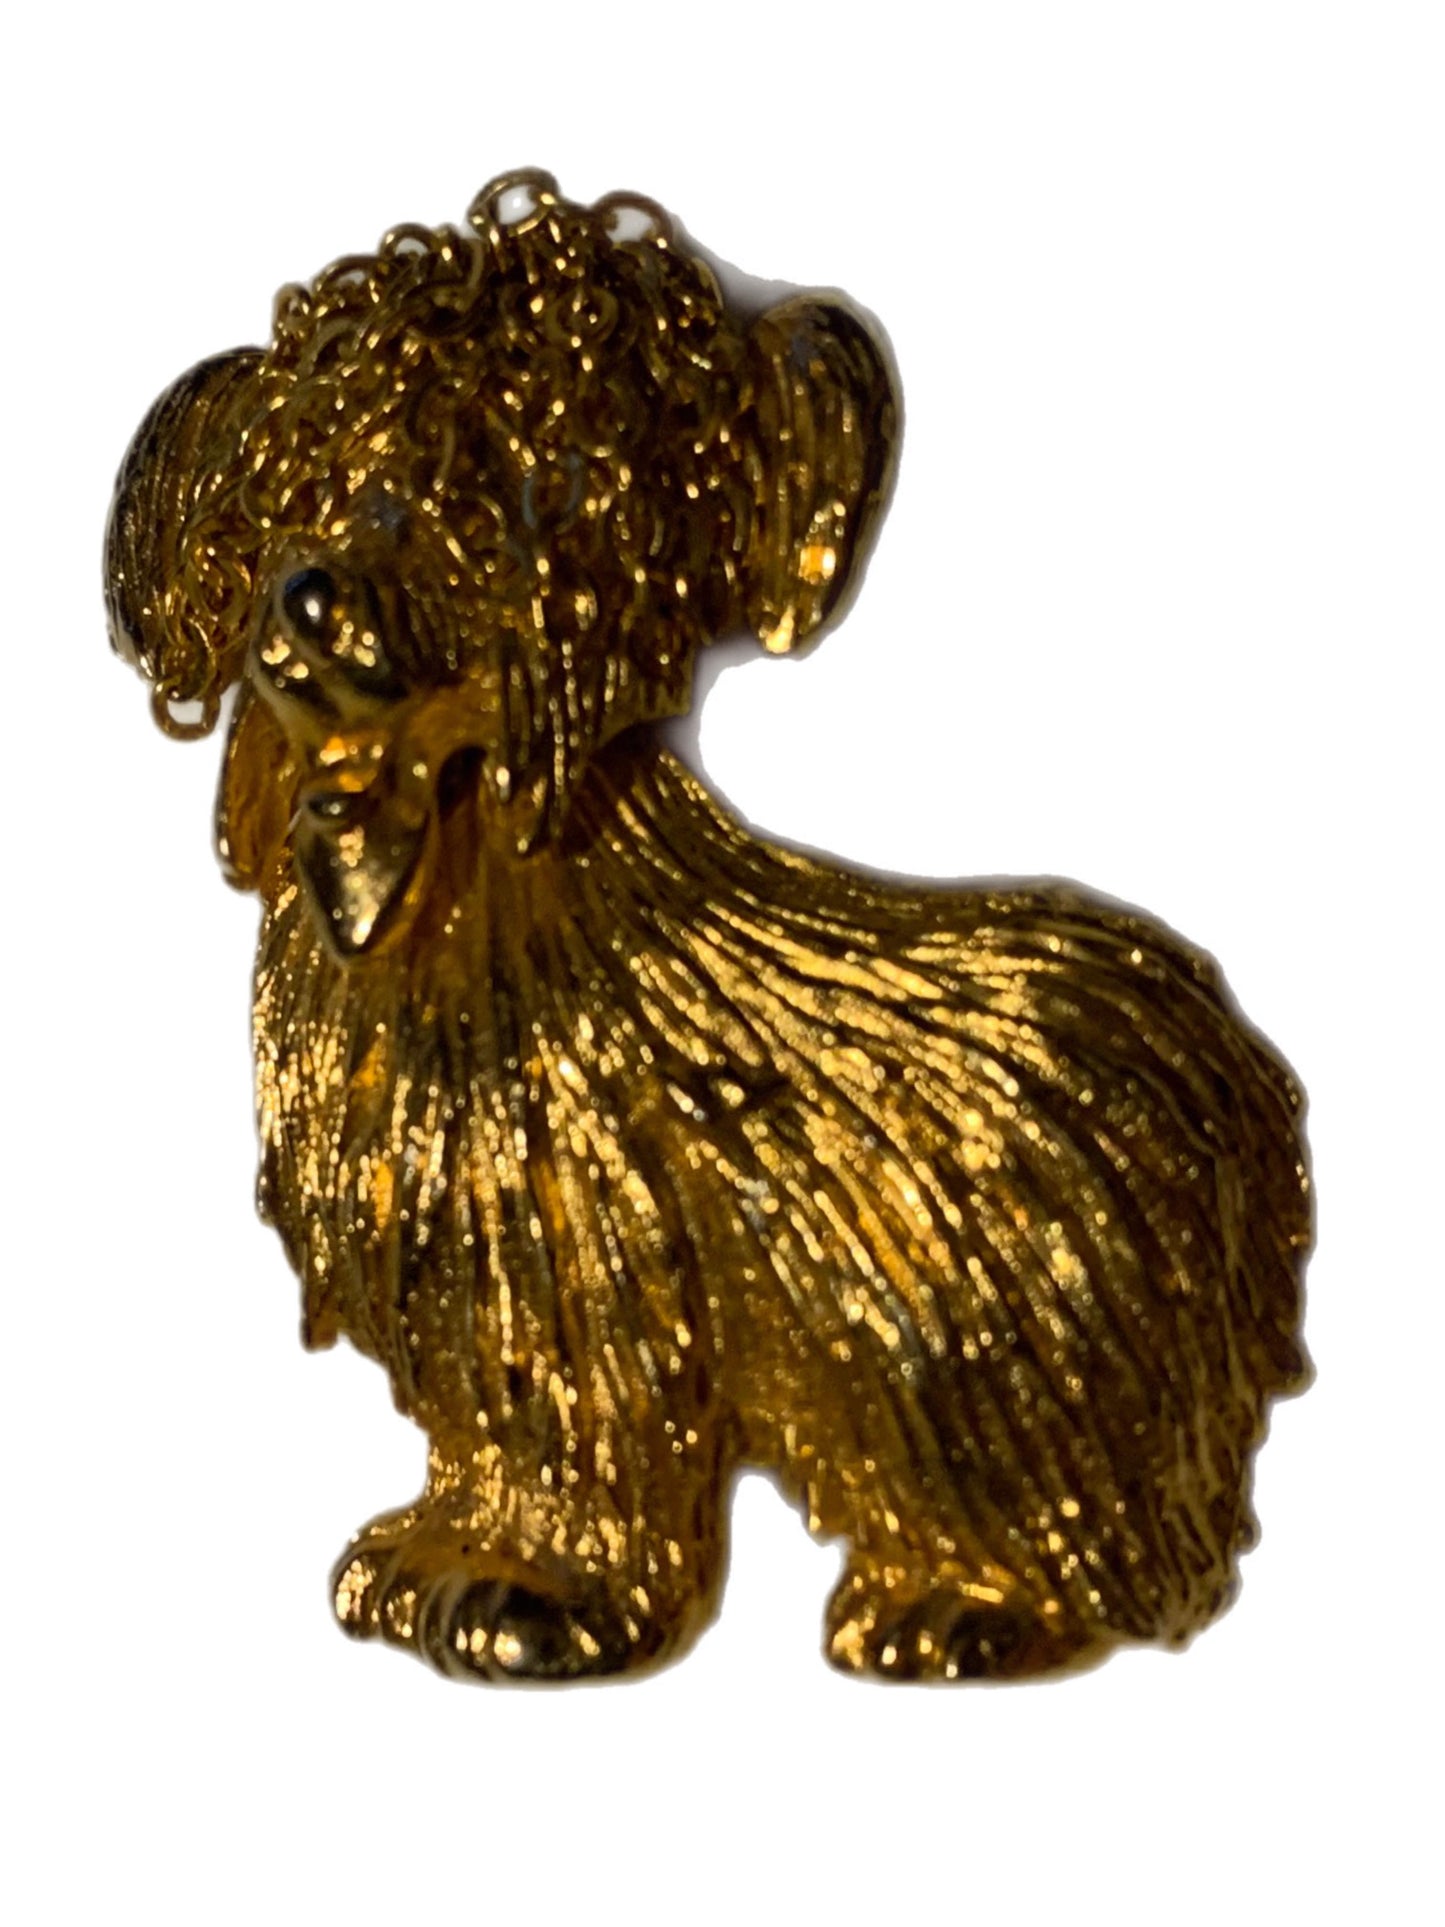 Clever English Sheepdog Brooch with Chain "Bangs" over Eyes circa 1960s